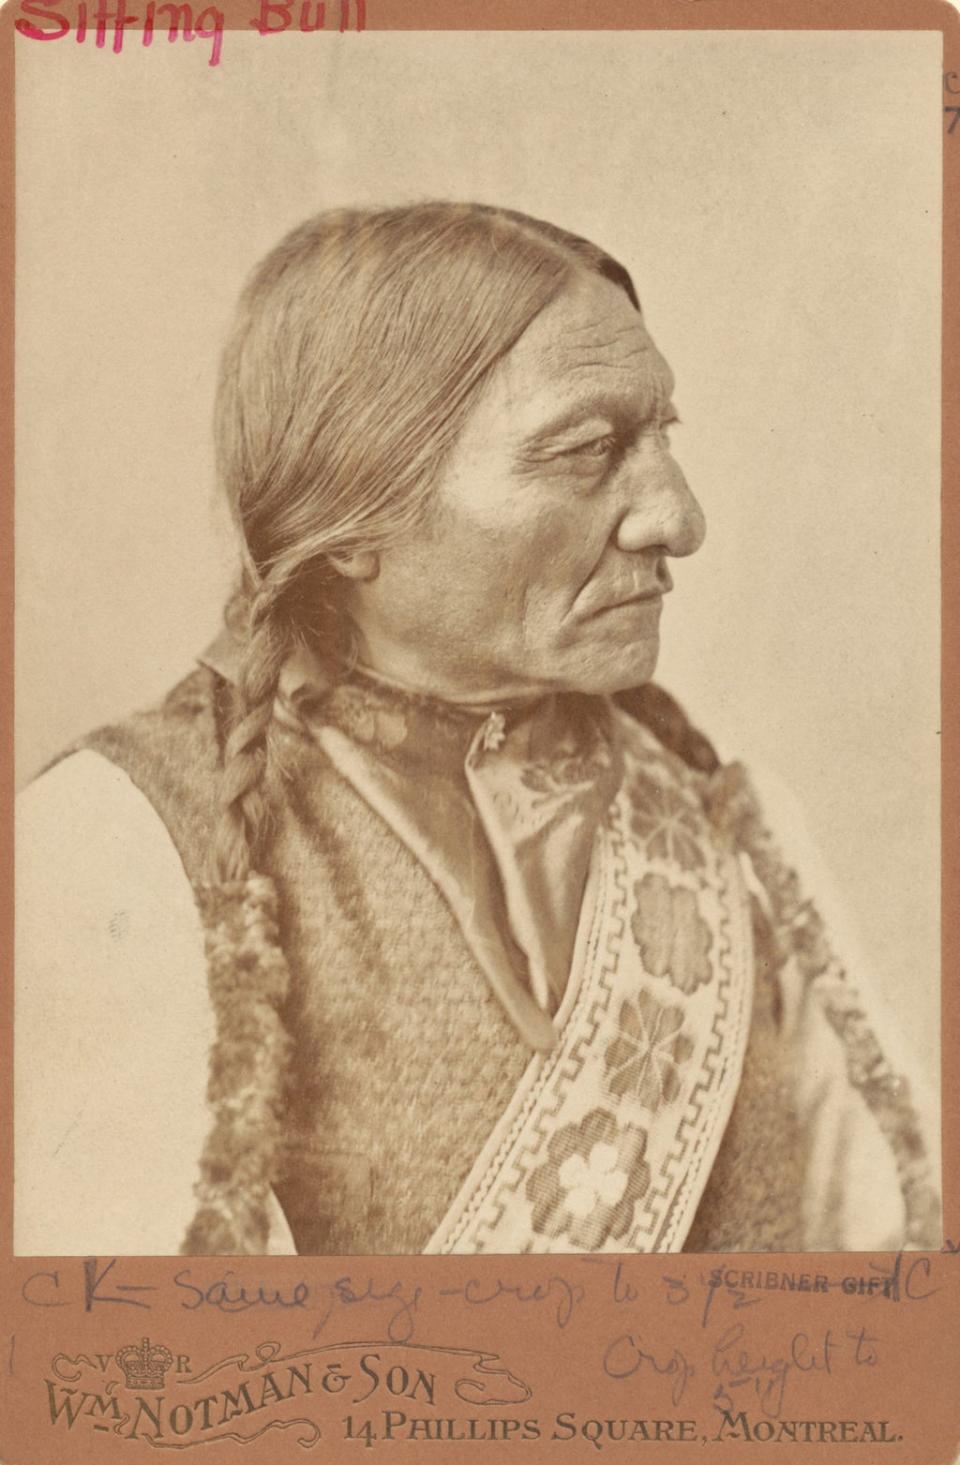 Native American leader Sitting Bull, who died in 1890, is seen in this picture from circa 1885 (Handout/National Portrait Gallery, Smith/AFP via Getty Images)